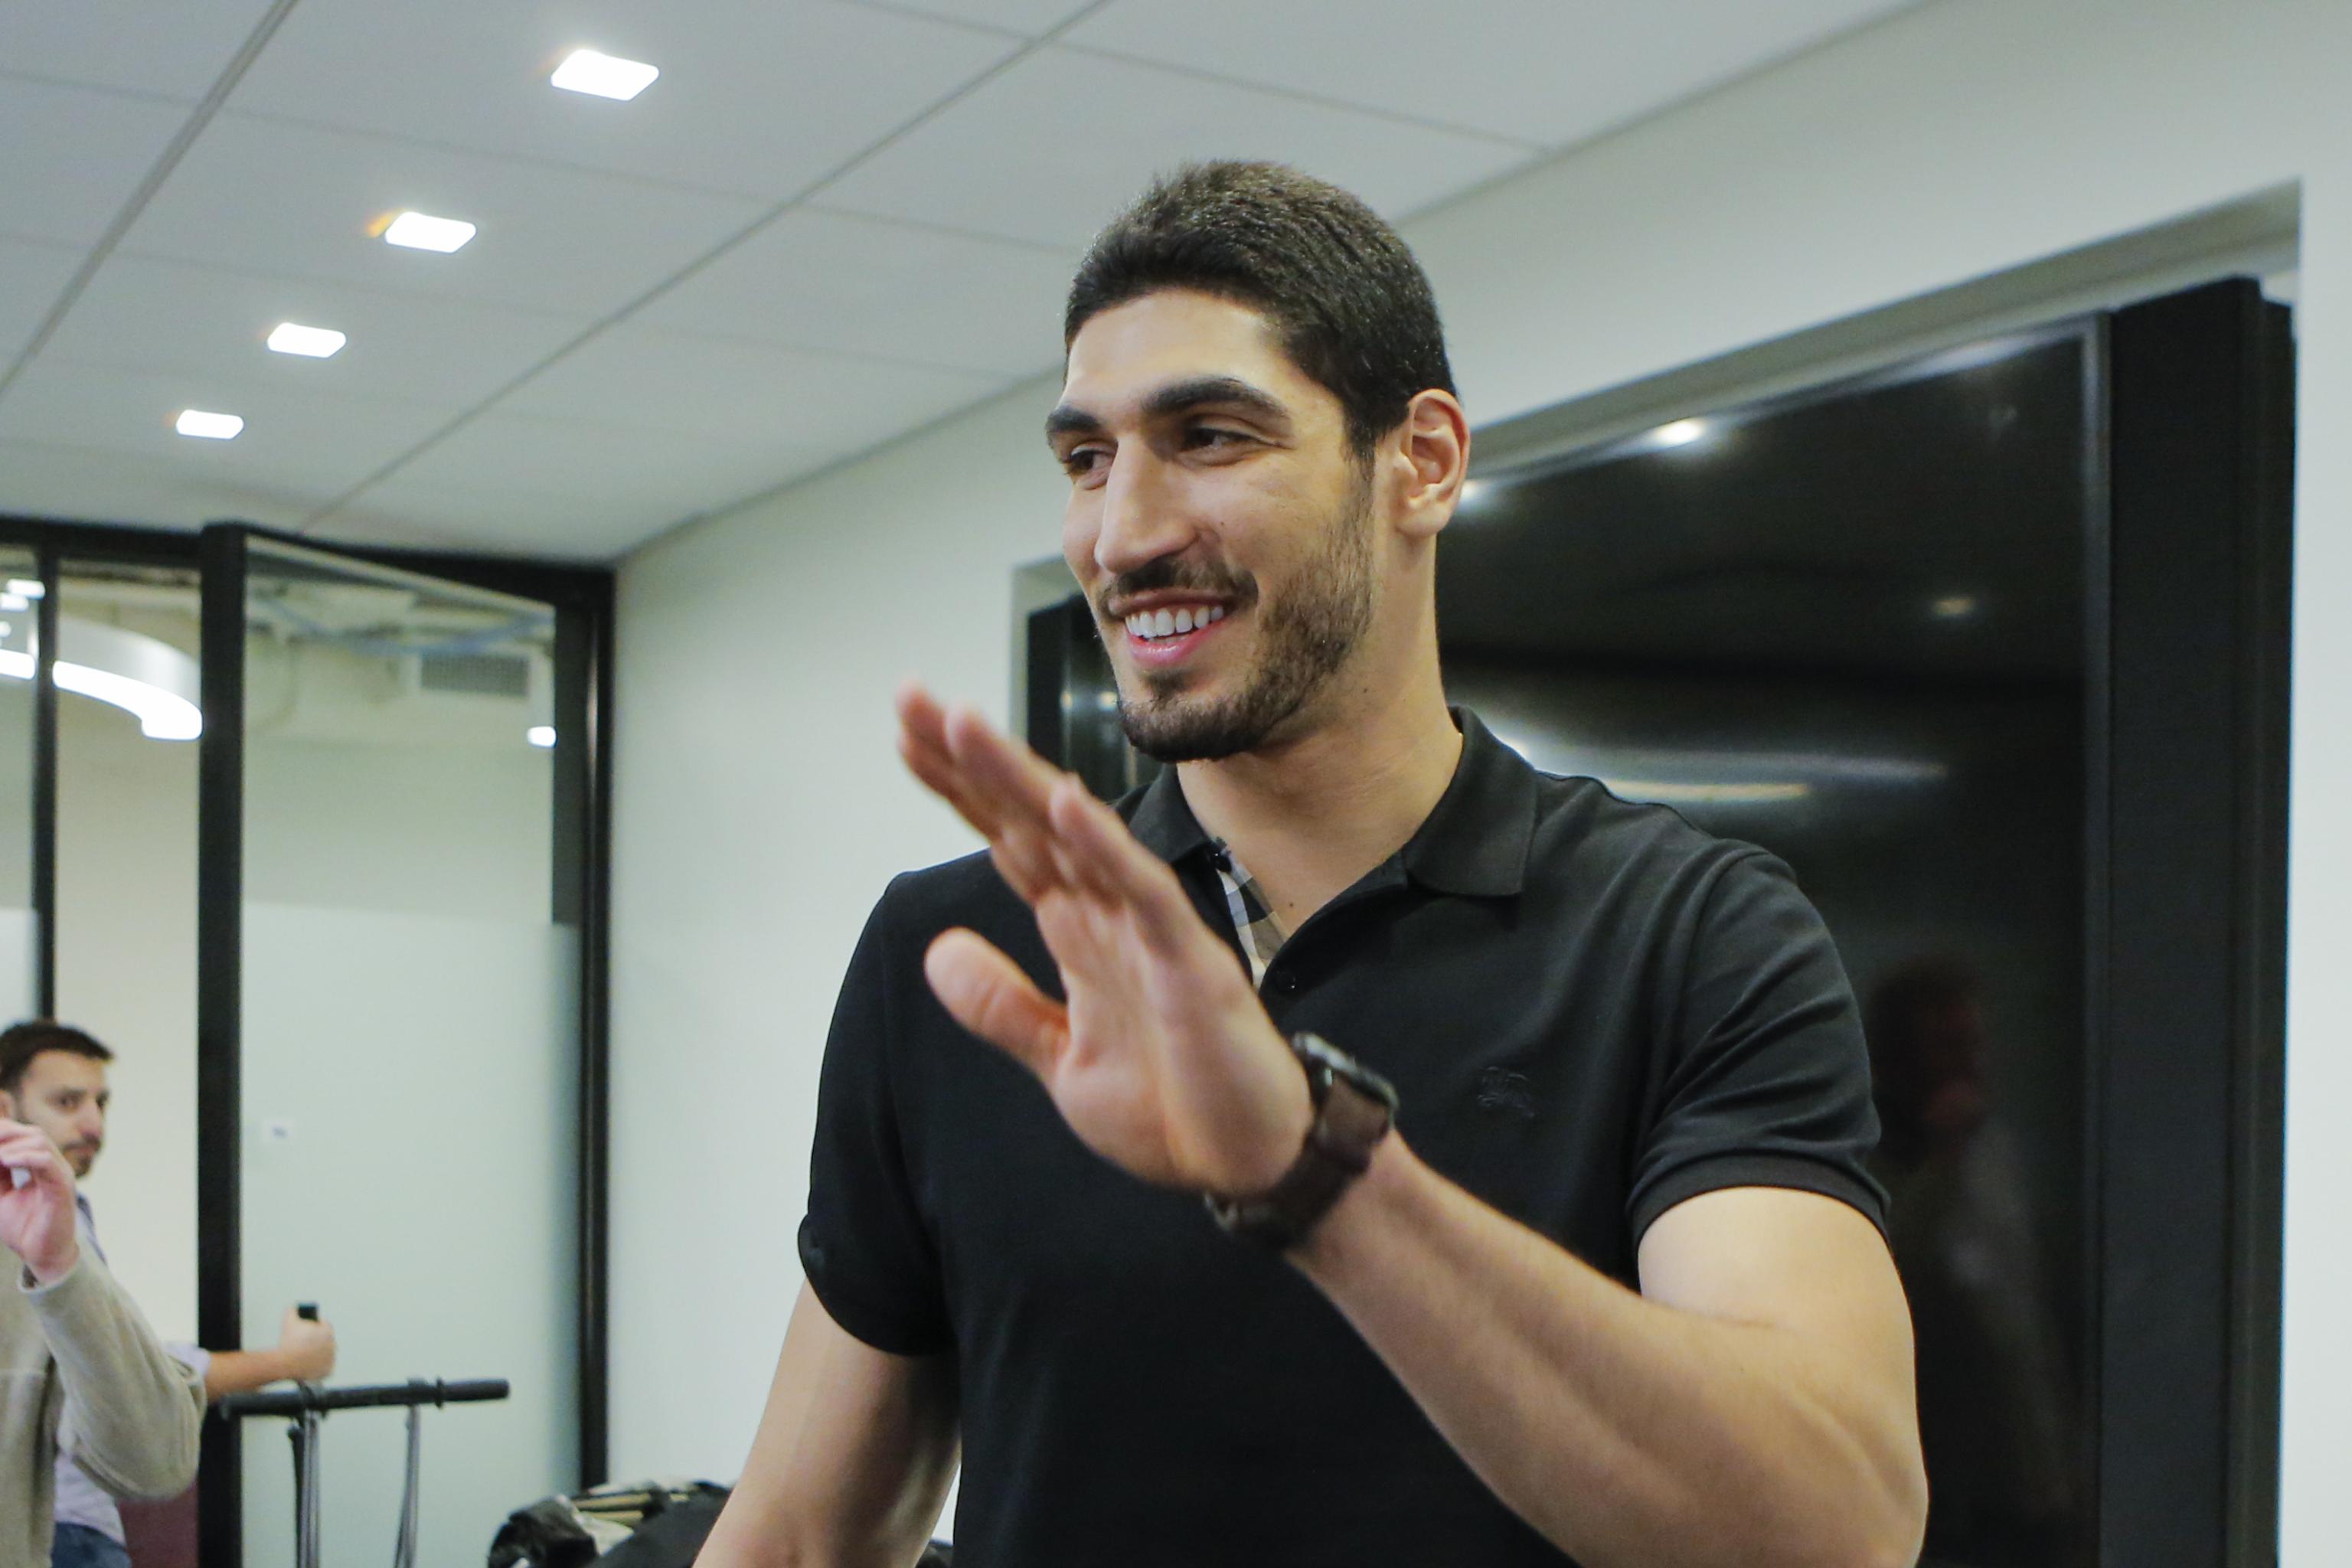 I could cry': Former OKC Thunder player Enes Kanter says father released  from Turkish prison